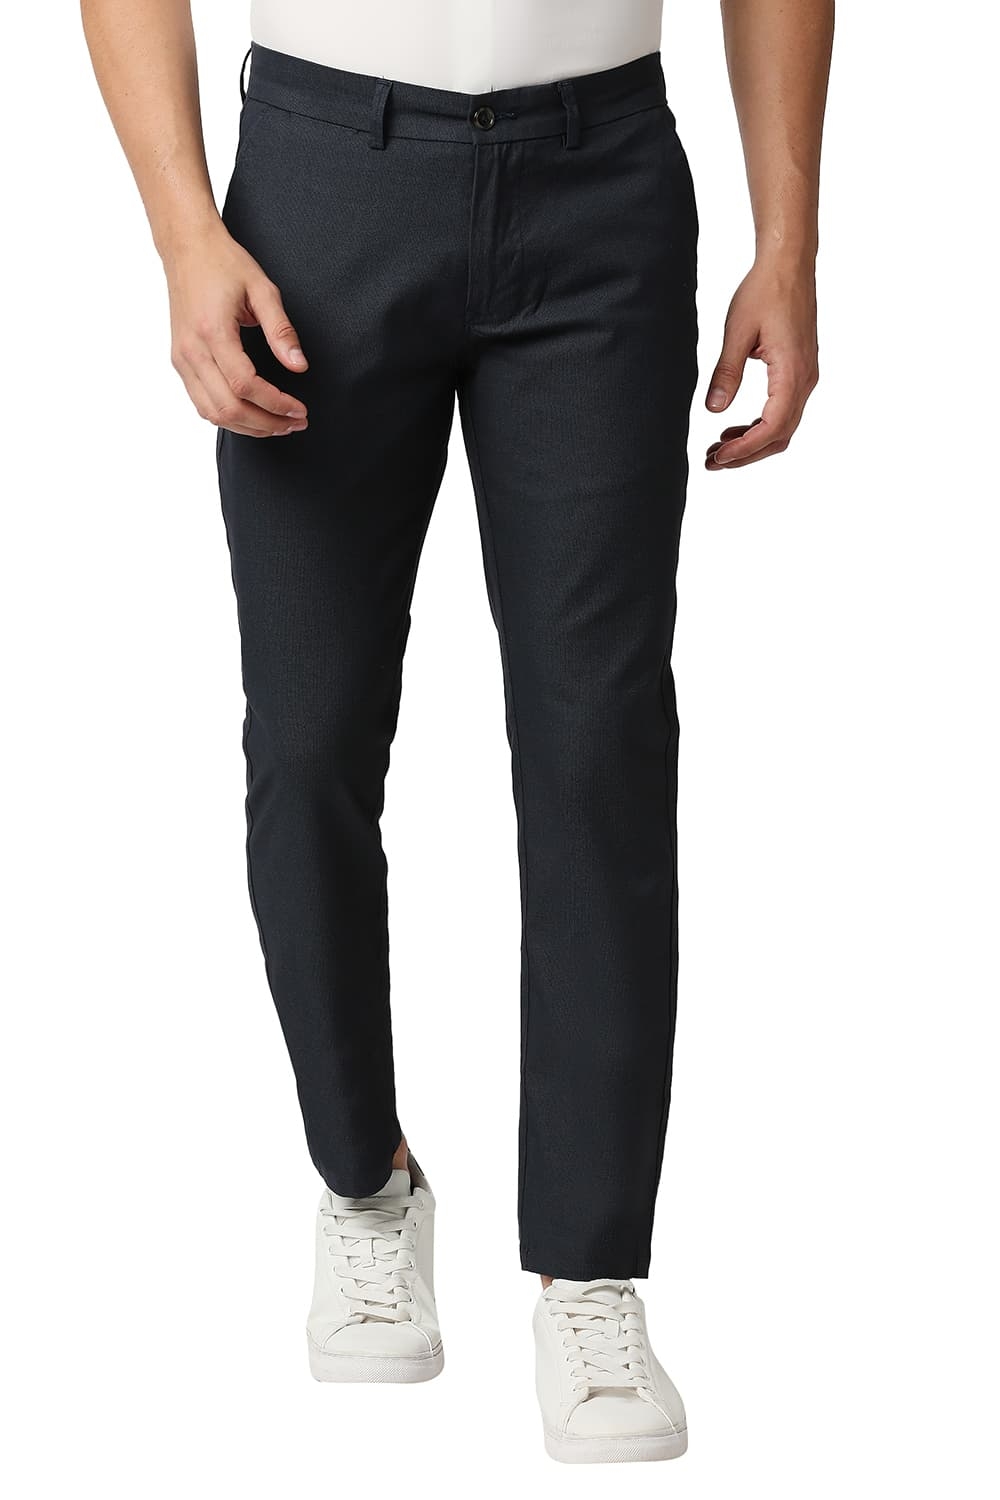 Basics | BASICS CASUAL SELF NAVY COTTON POLYESTER STRETCH TAPERED TROUSERS 